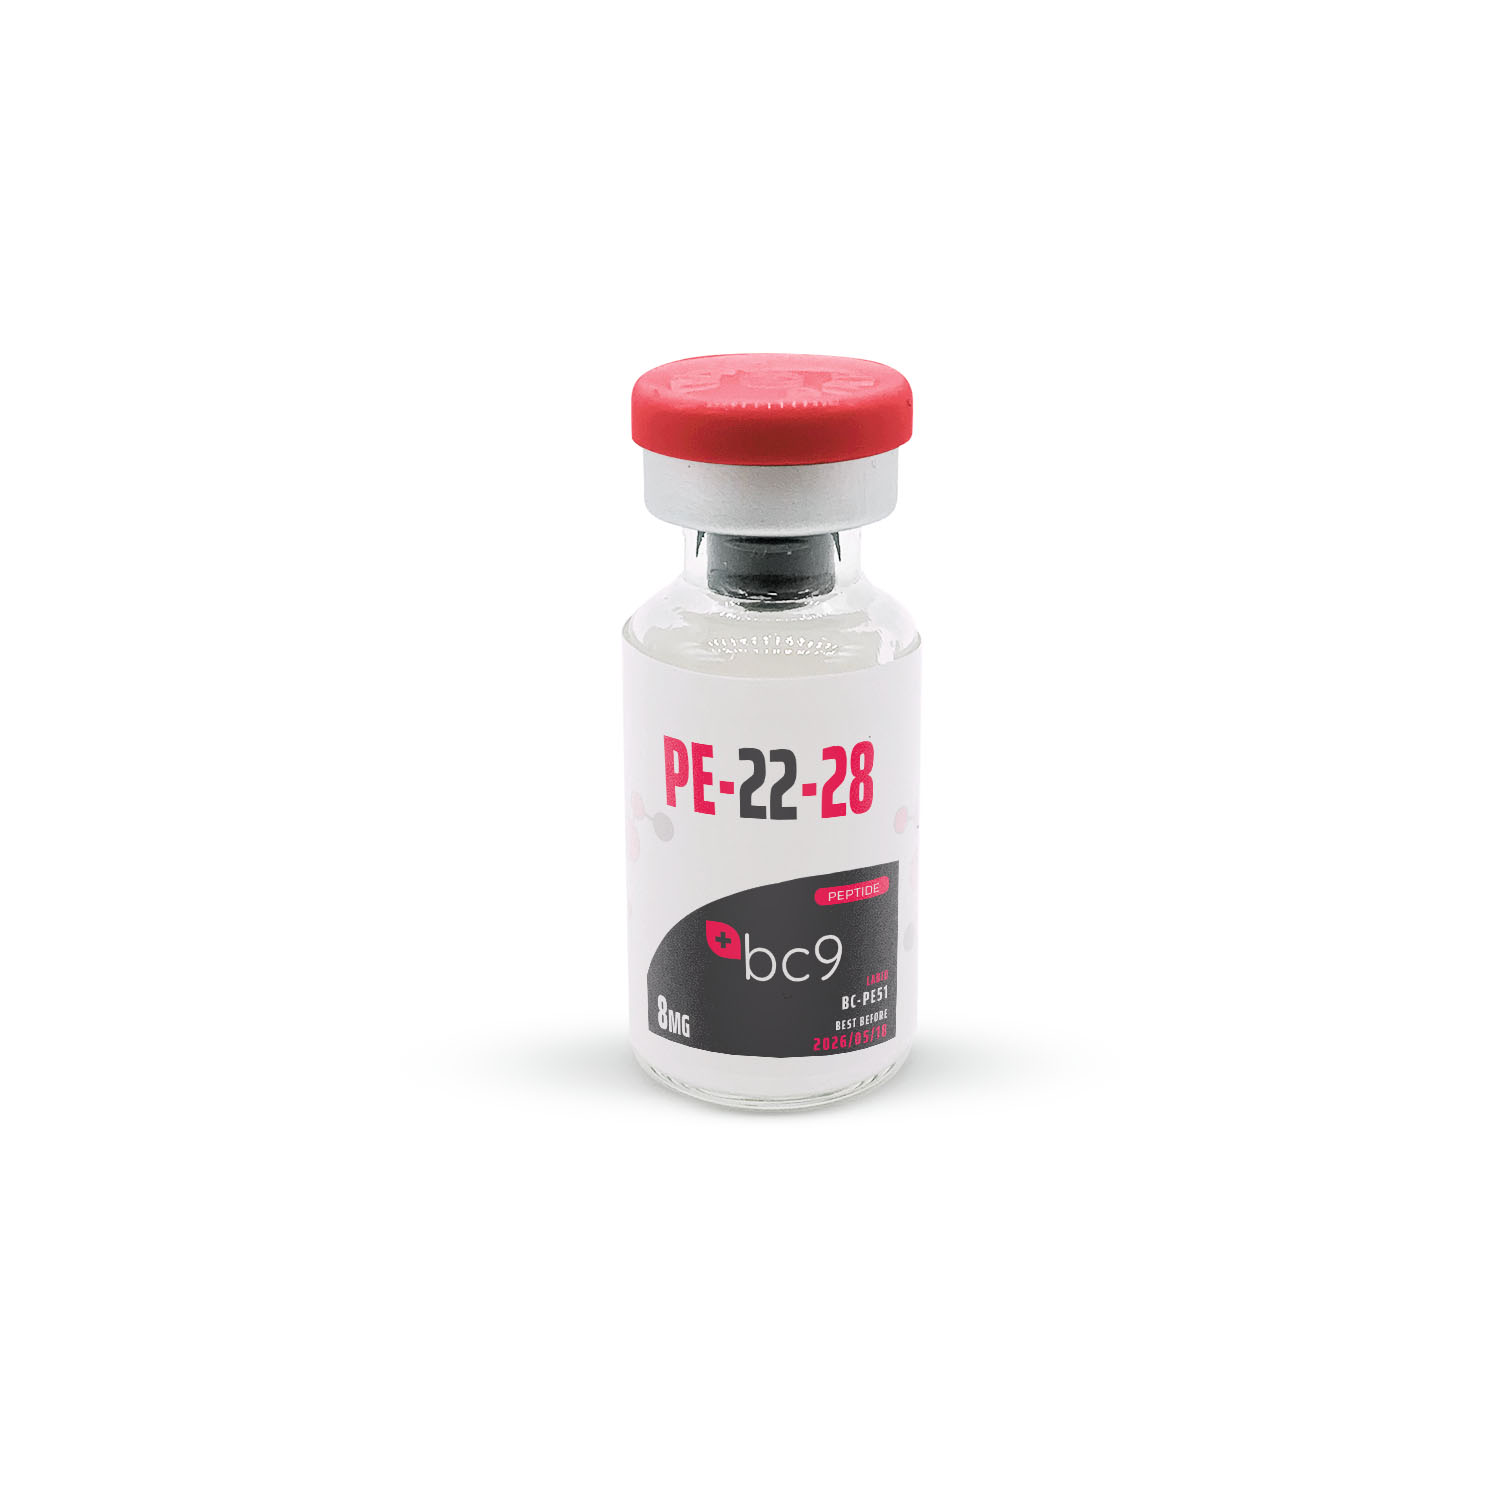 PE-22-28 Peptide for Sale | 3rd Party Tested | BC9.org